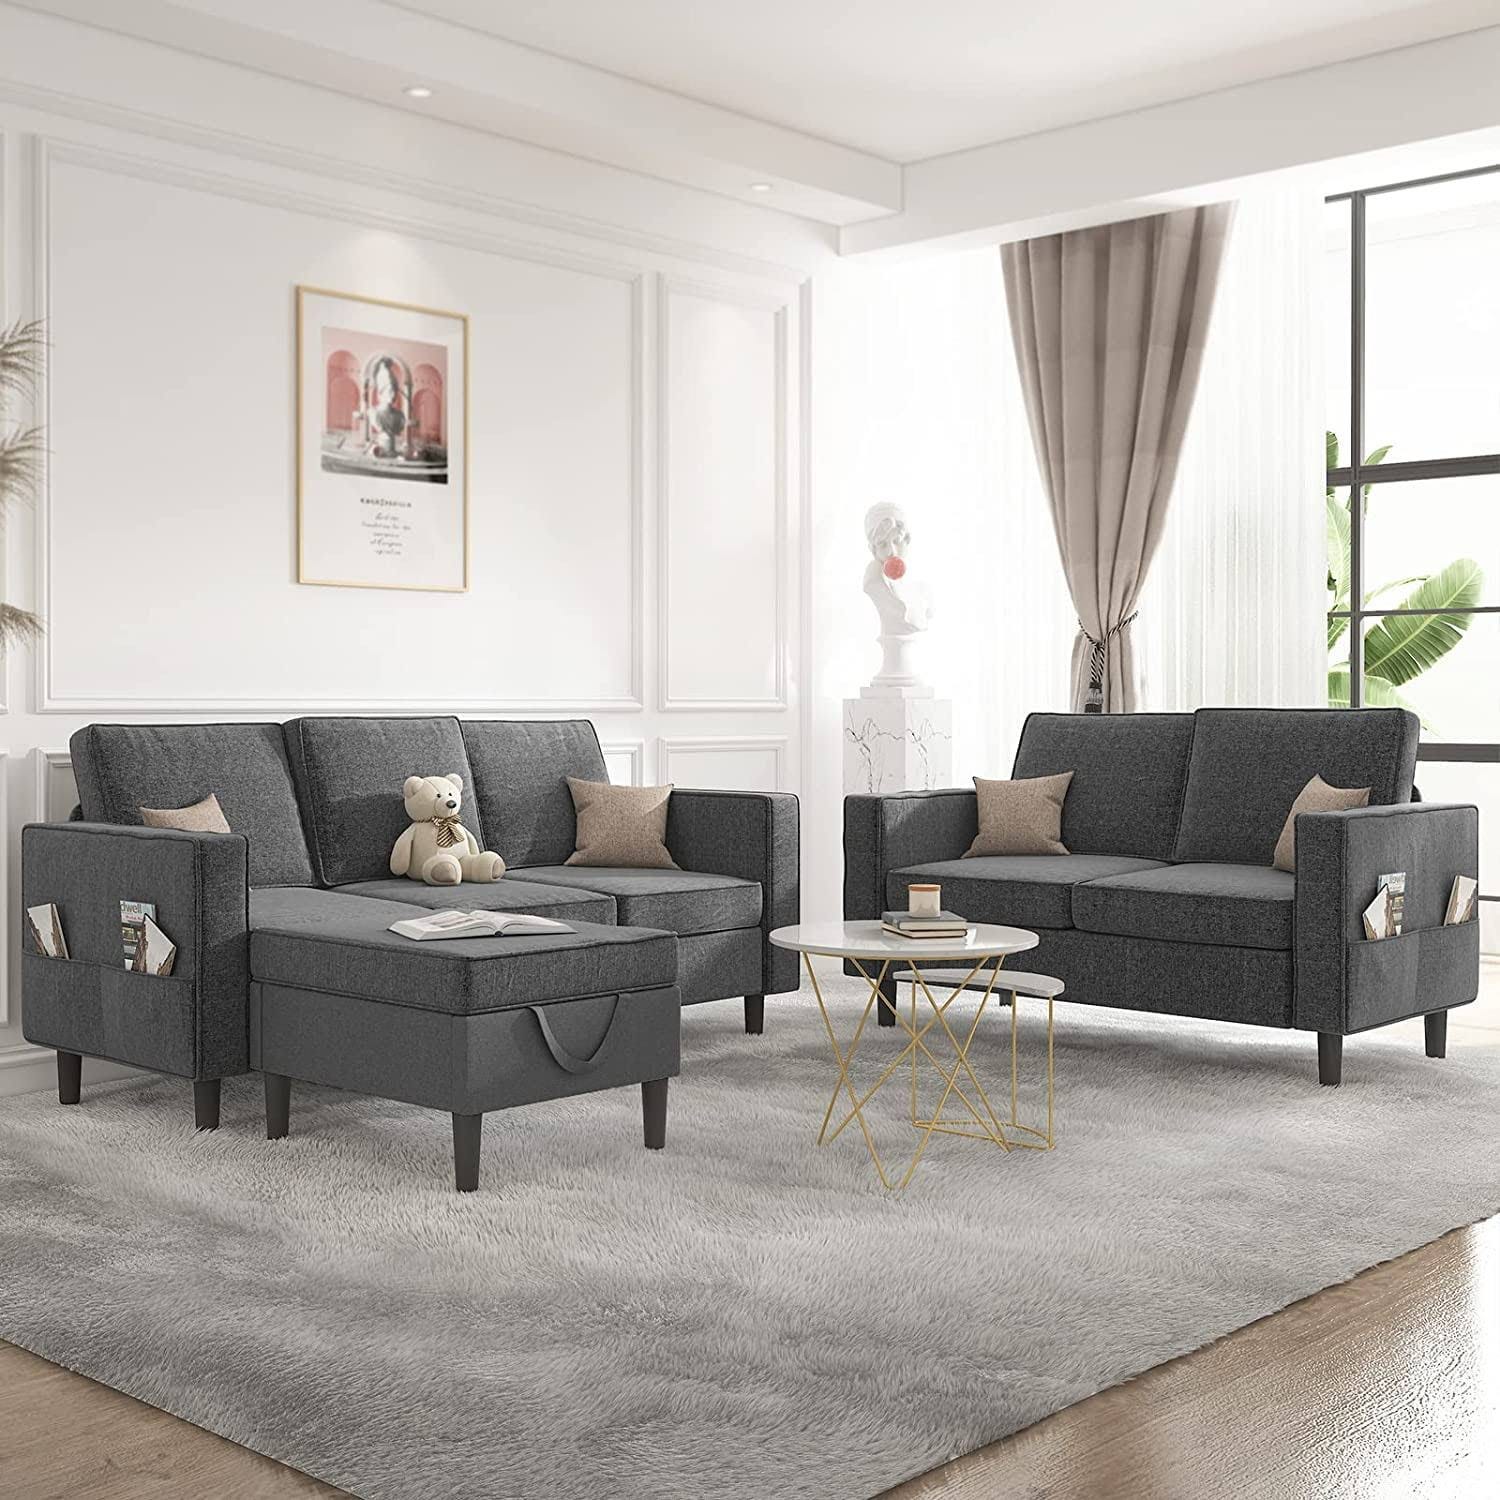 Convertible Dark Gray Small Sectional Sofa with Storage Ottoman | Image